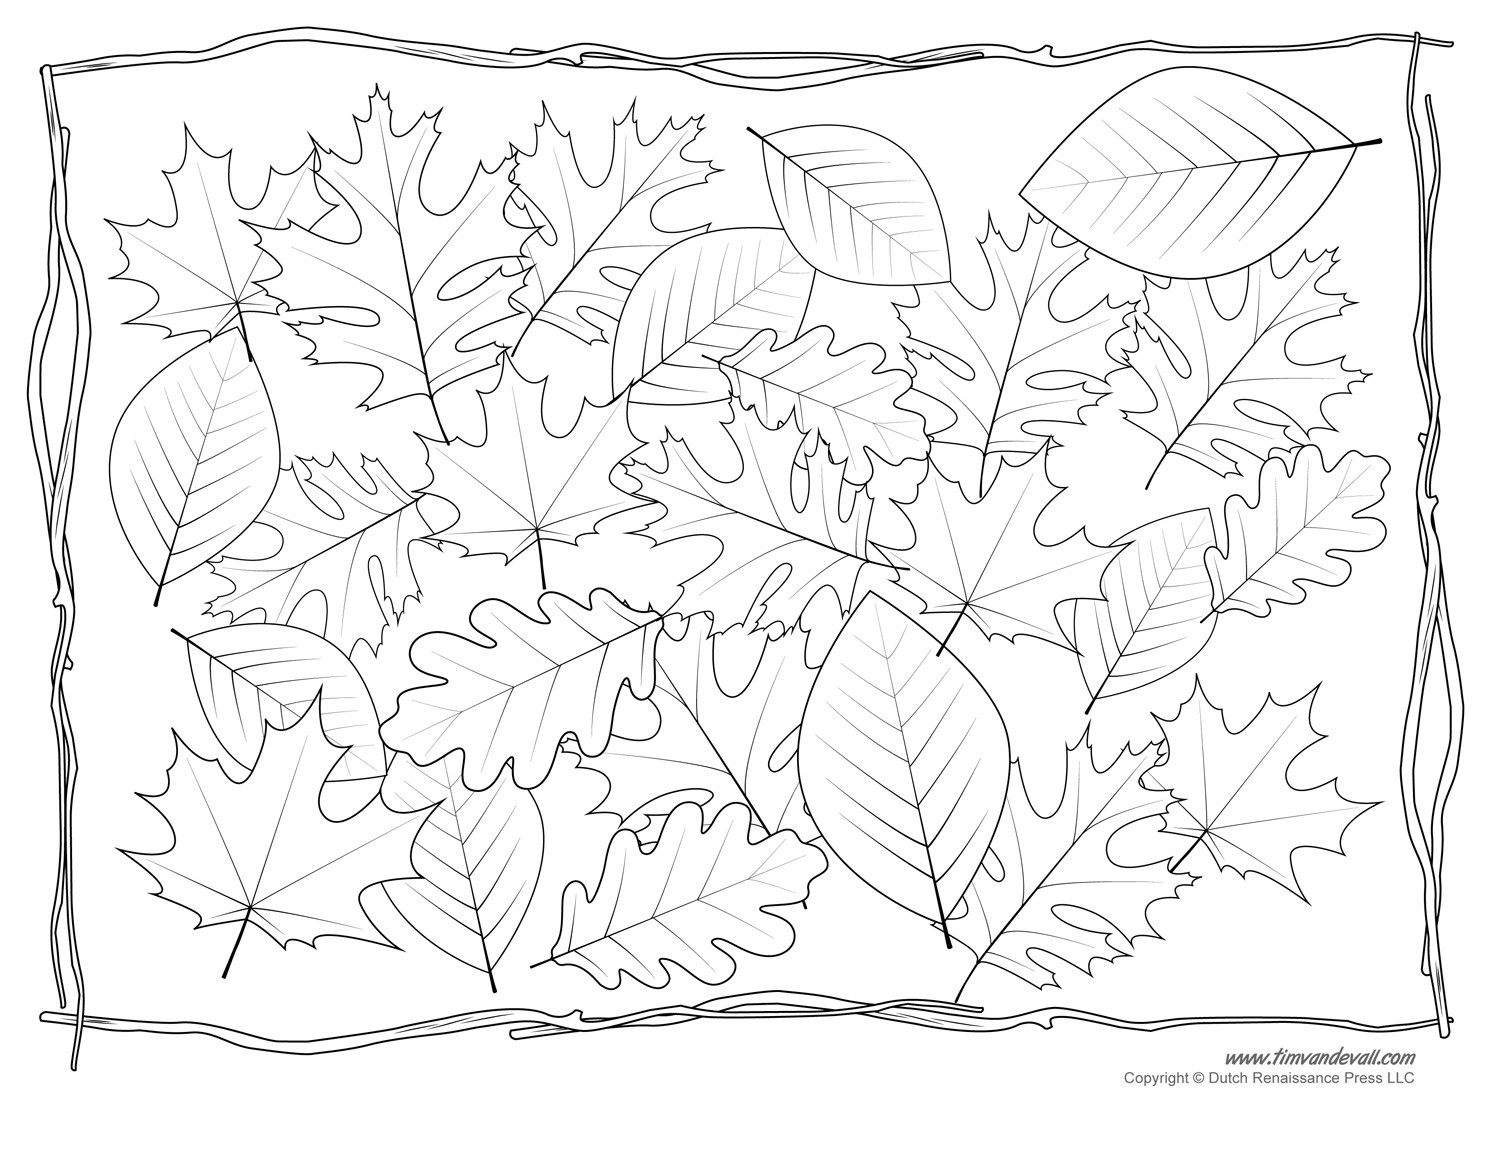 Printable Leaves Coloring Pages
 Leaf Templates & Leaf Coloring Pages for Kids